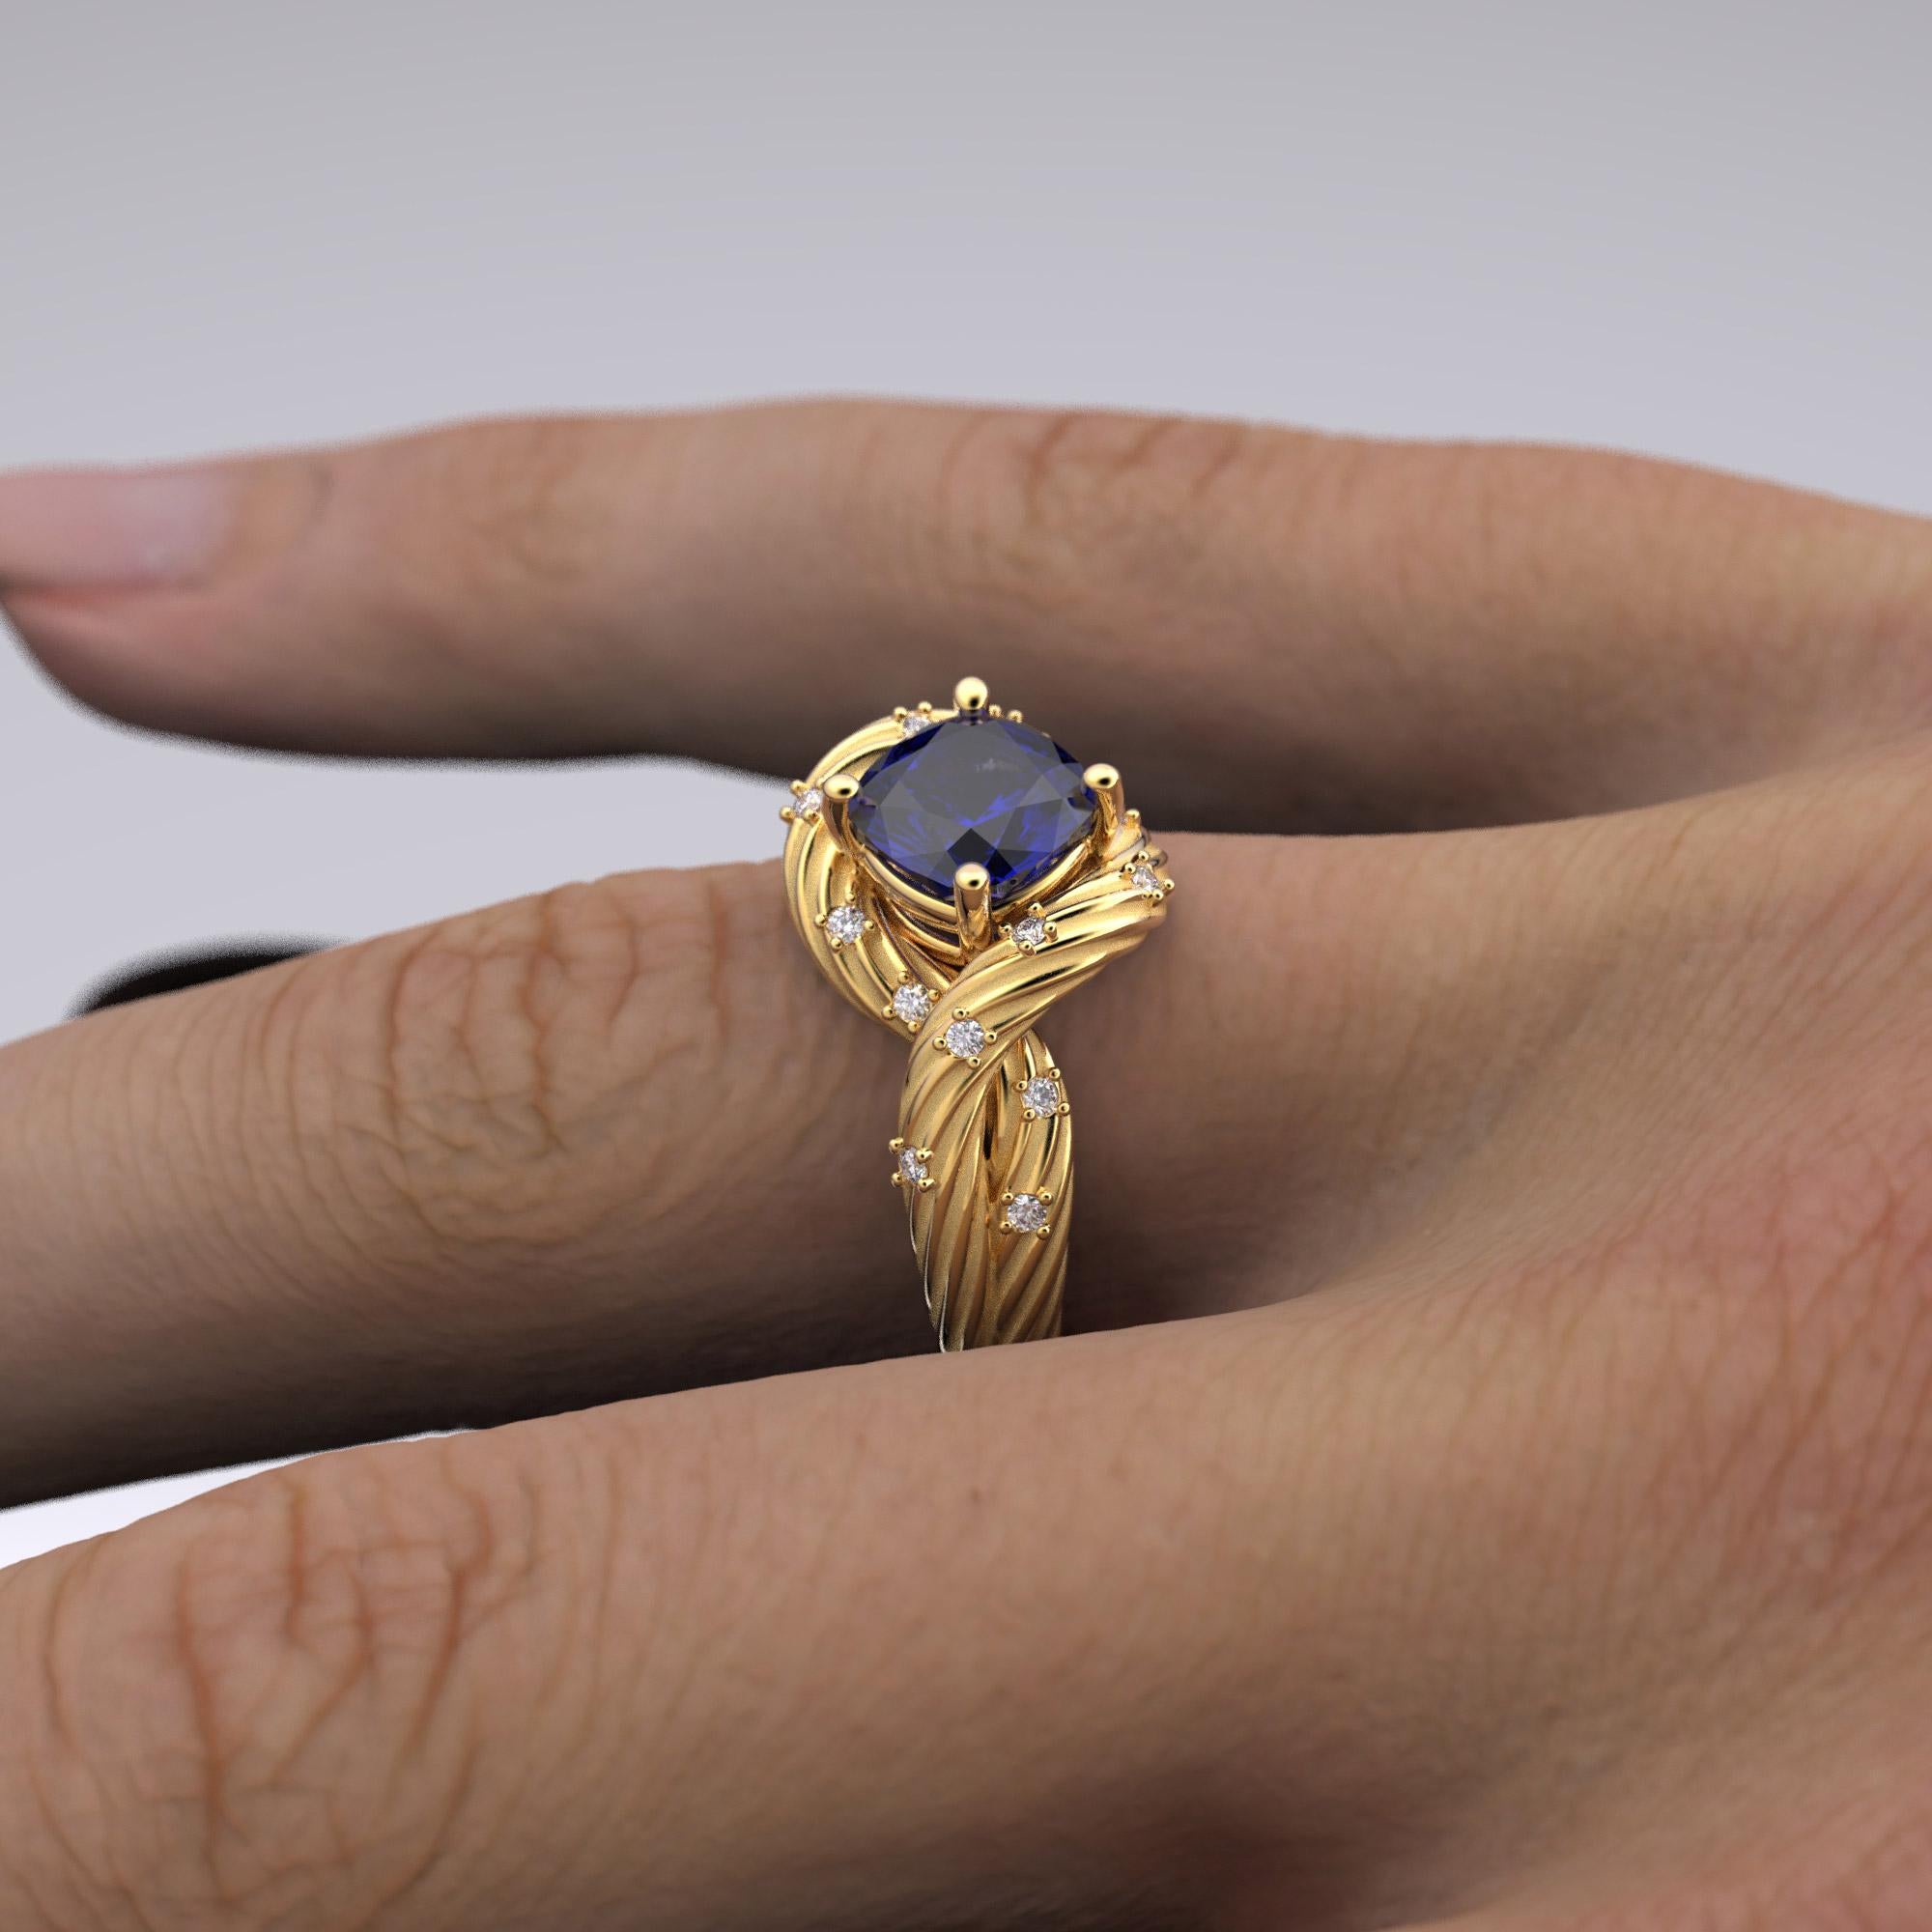 For Sale:  Tanzanite and Diamonds Ring 14k Solid Gold, Italian Fine Jewelry, made to order. 5